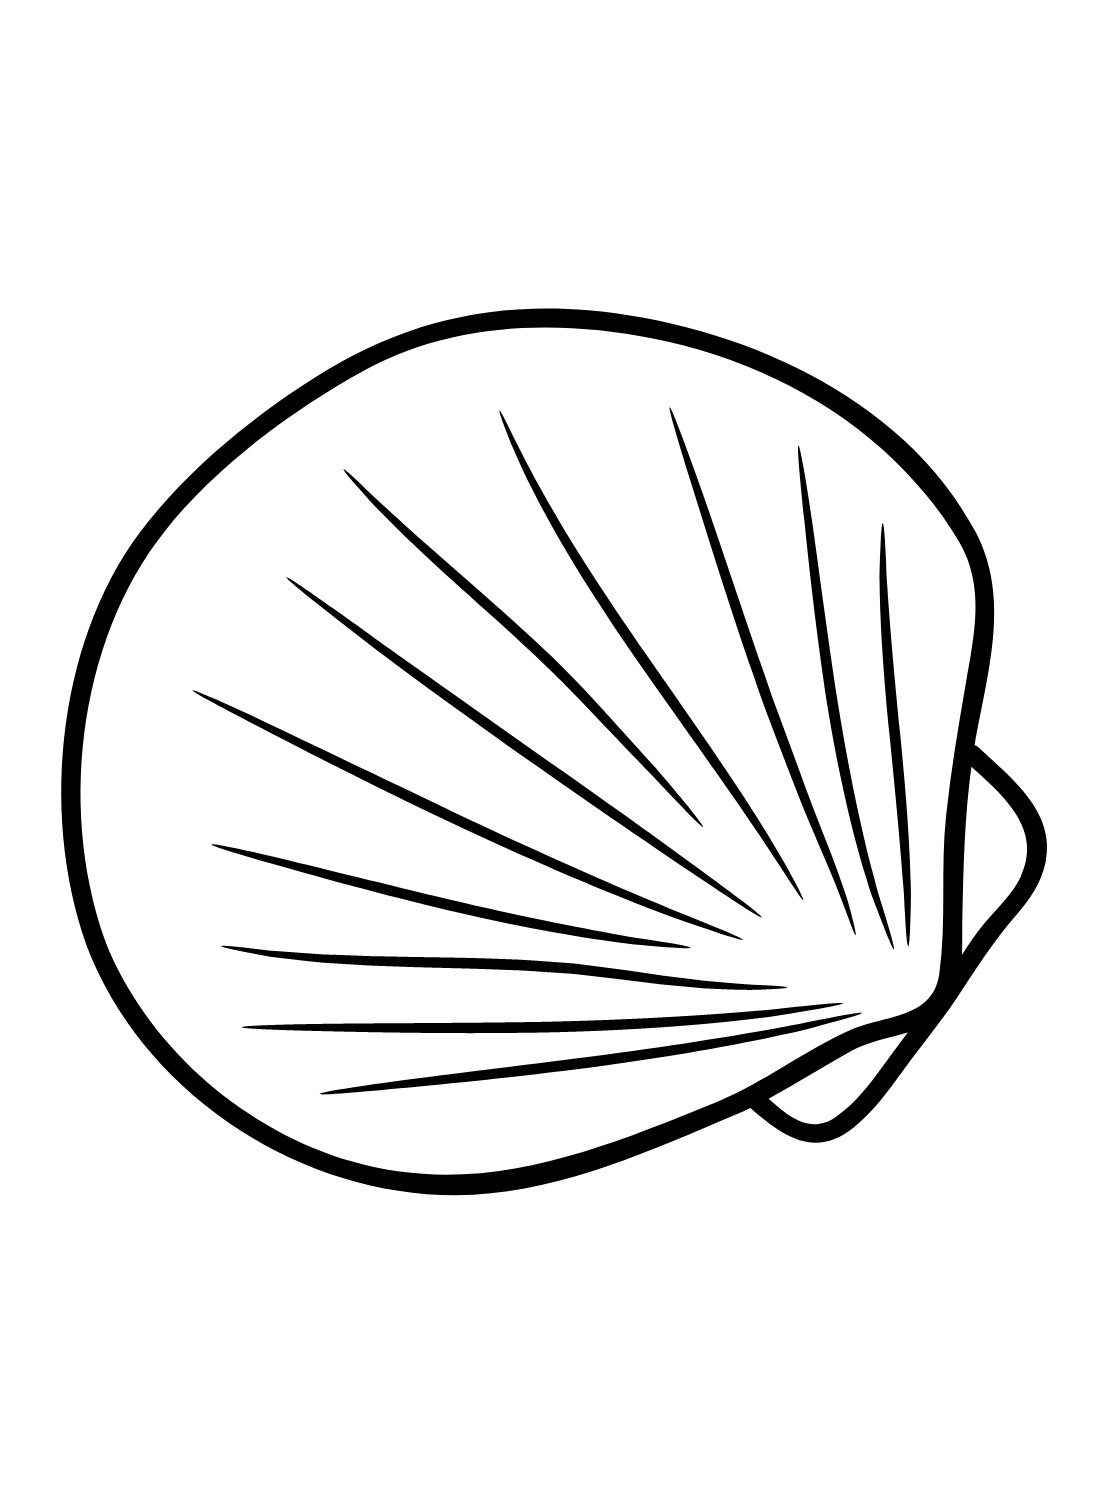 Scallop Images Coloring Page